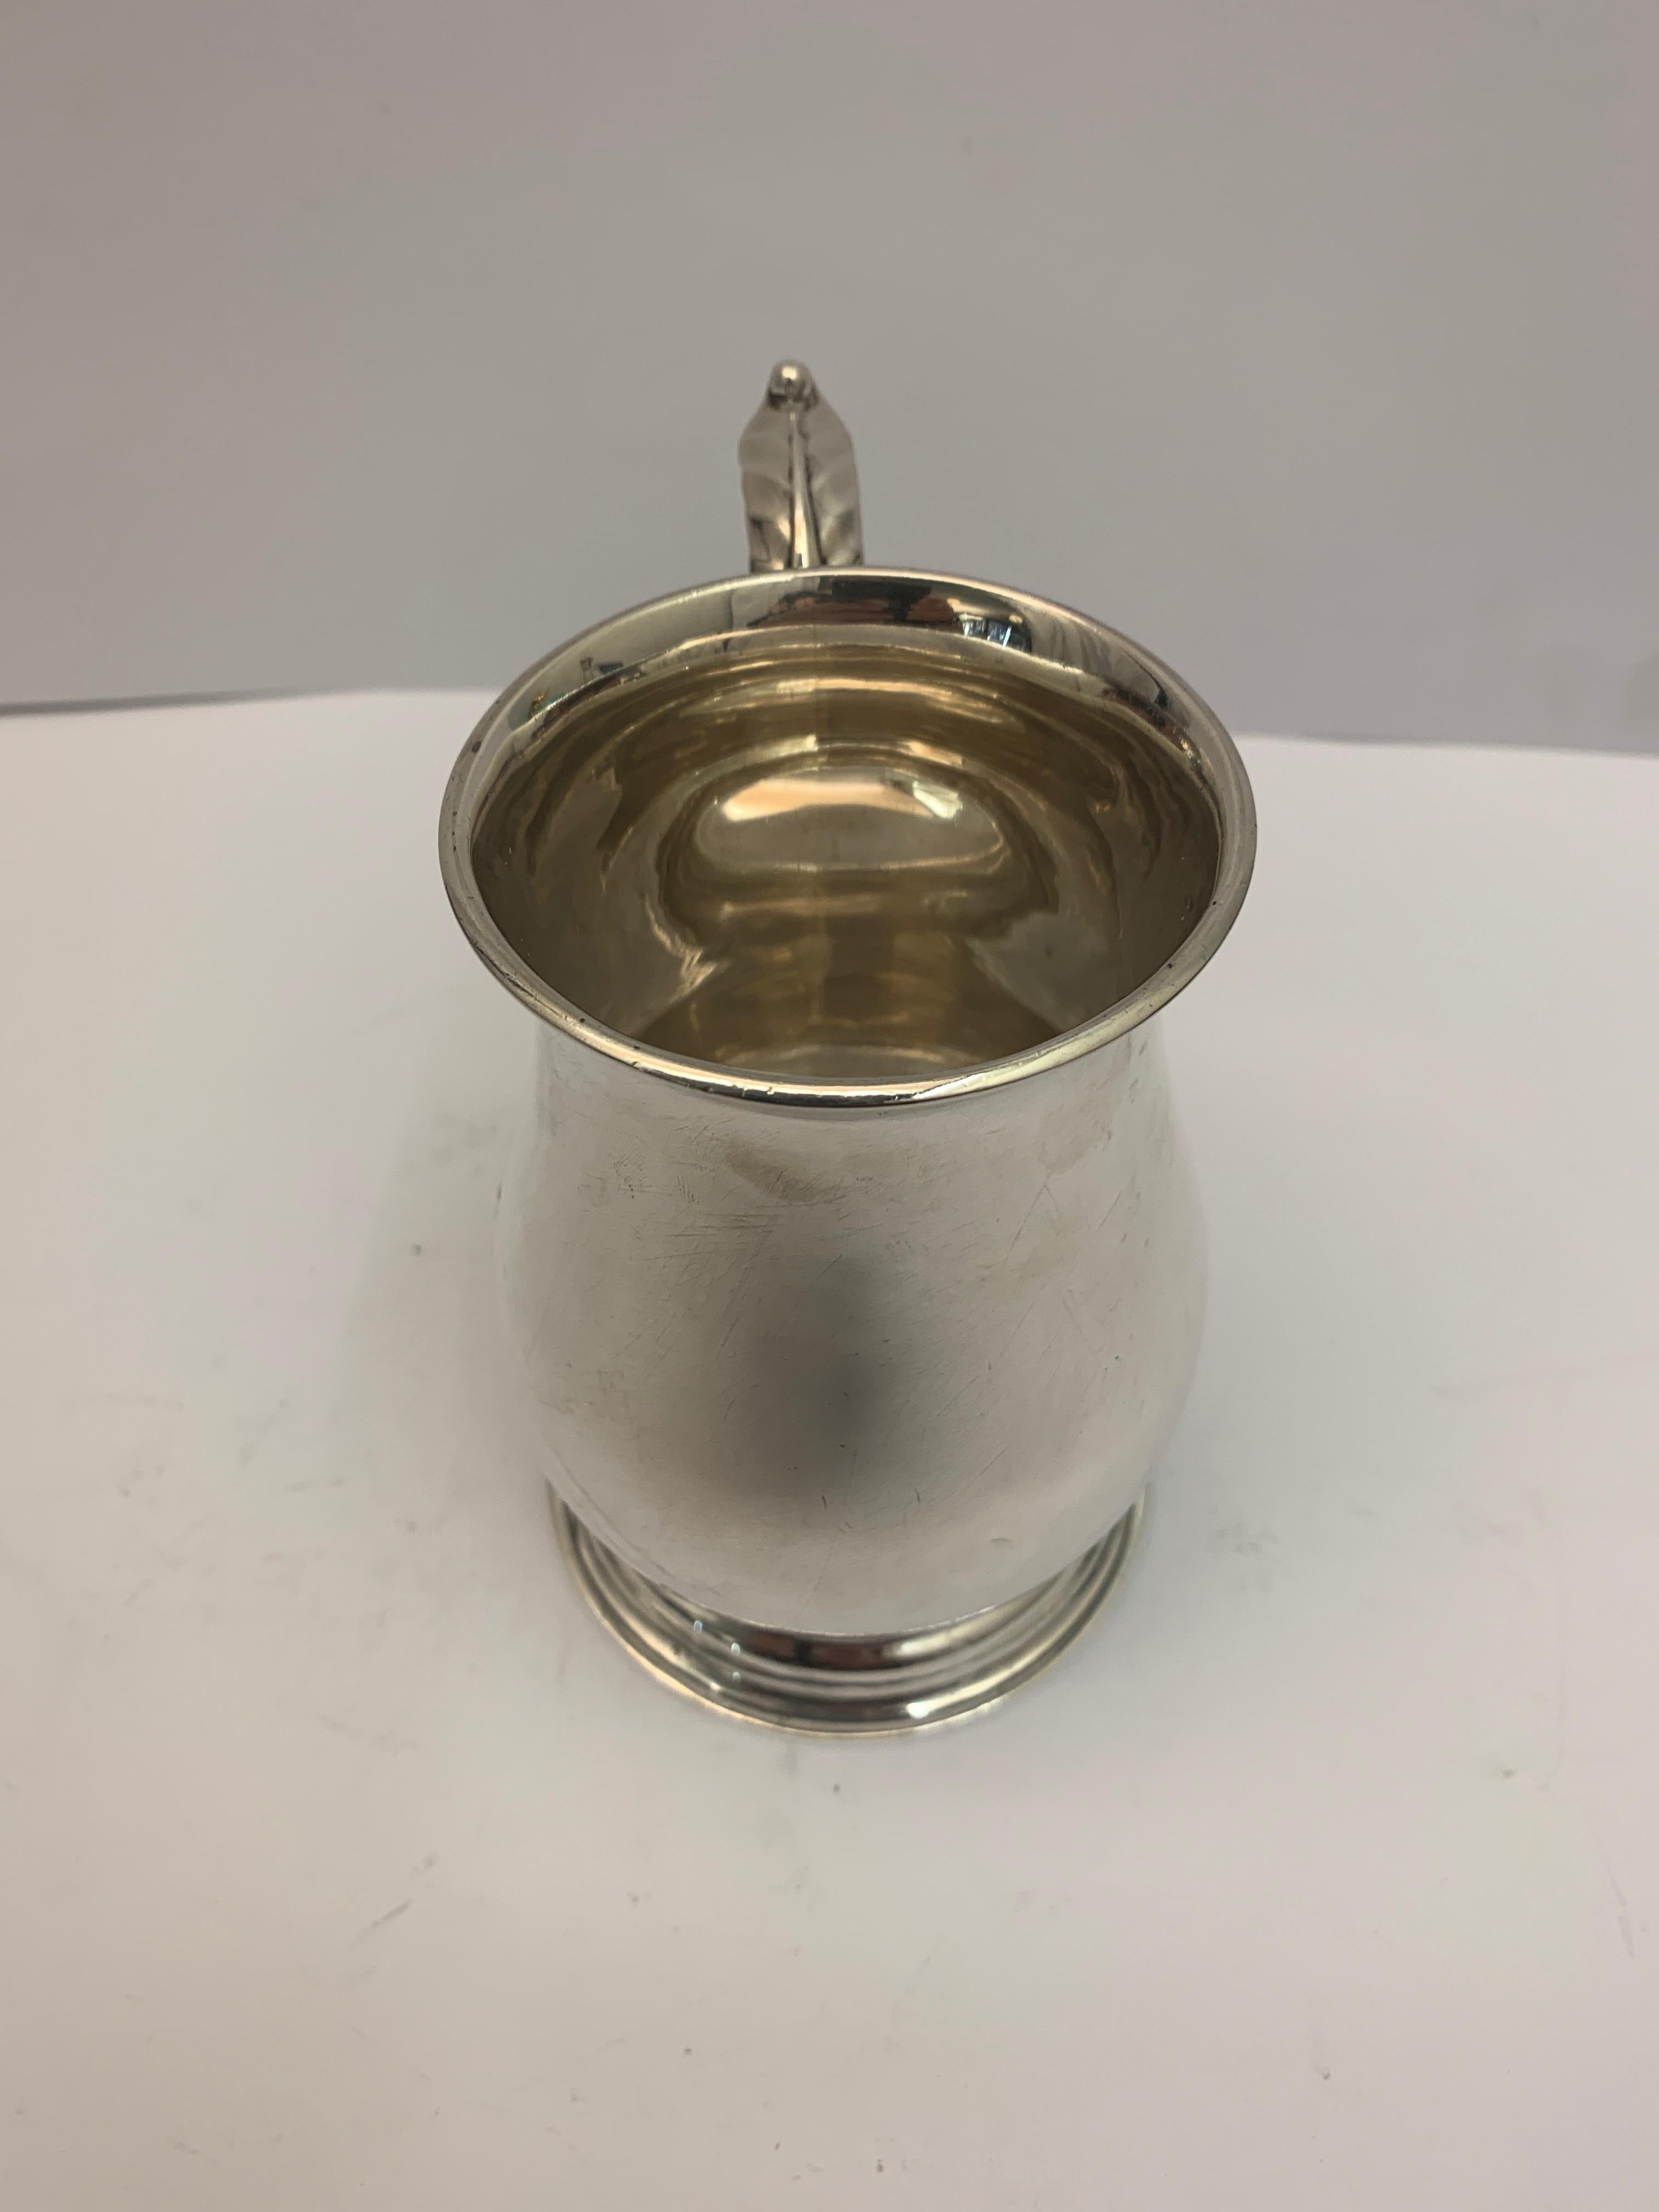 A small antique silver mug with a decorative scroll and leaf style handle. Made in 1910 by John Edward Wilmot. Fully Hallmarked Birmingham.